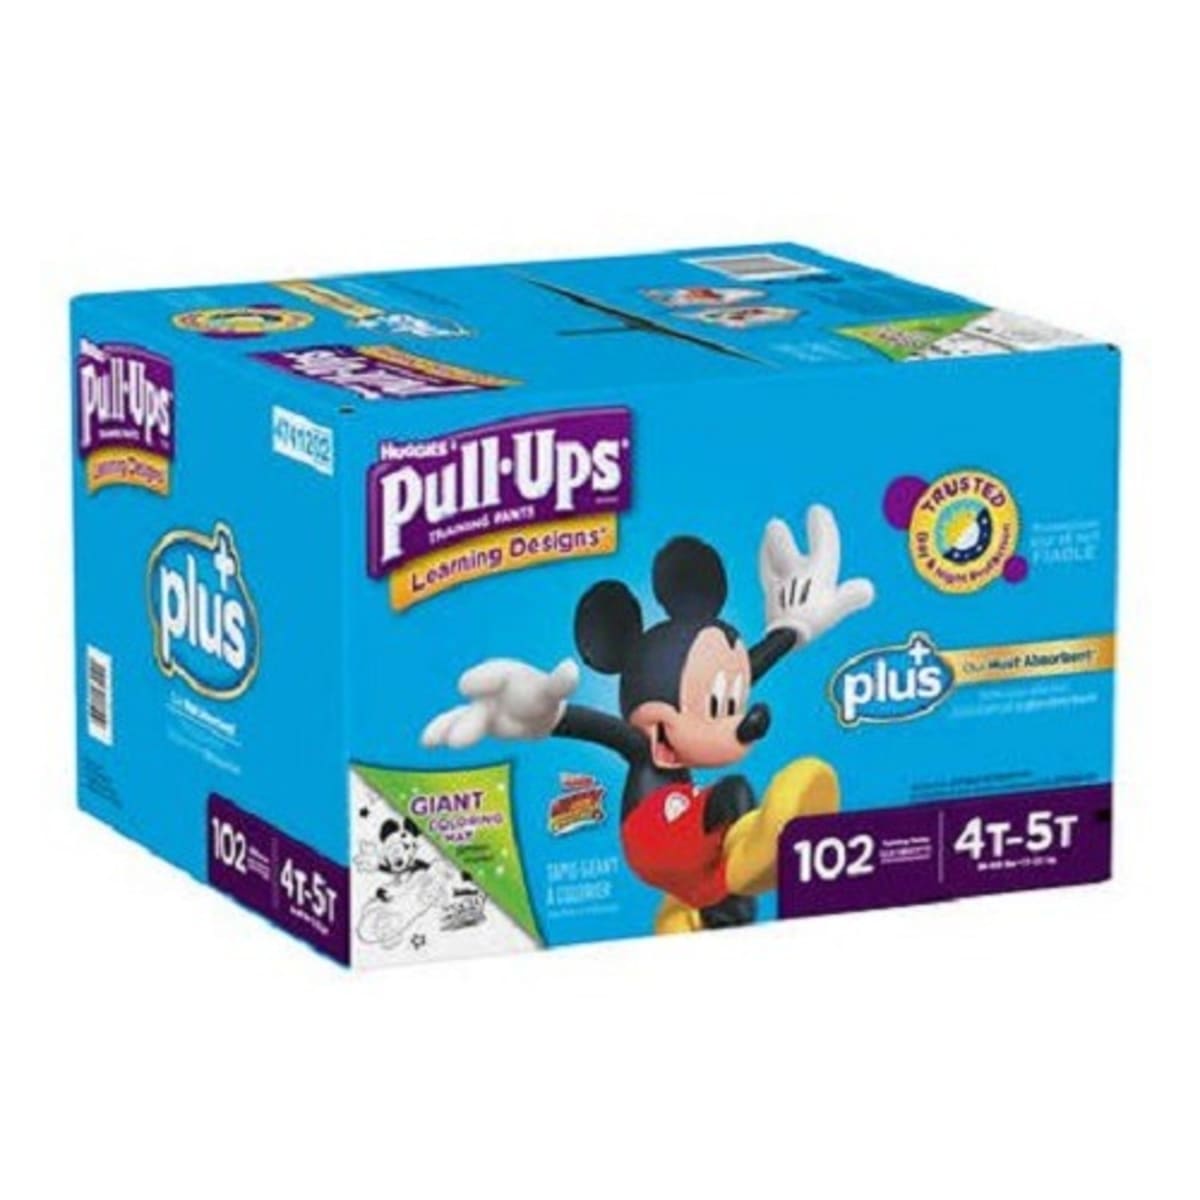 Huggies Pull Ups Training Diapers For Boys - 4t-5t (102 Count